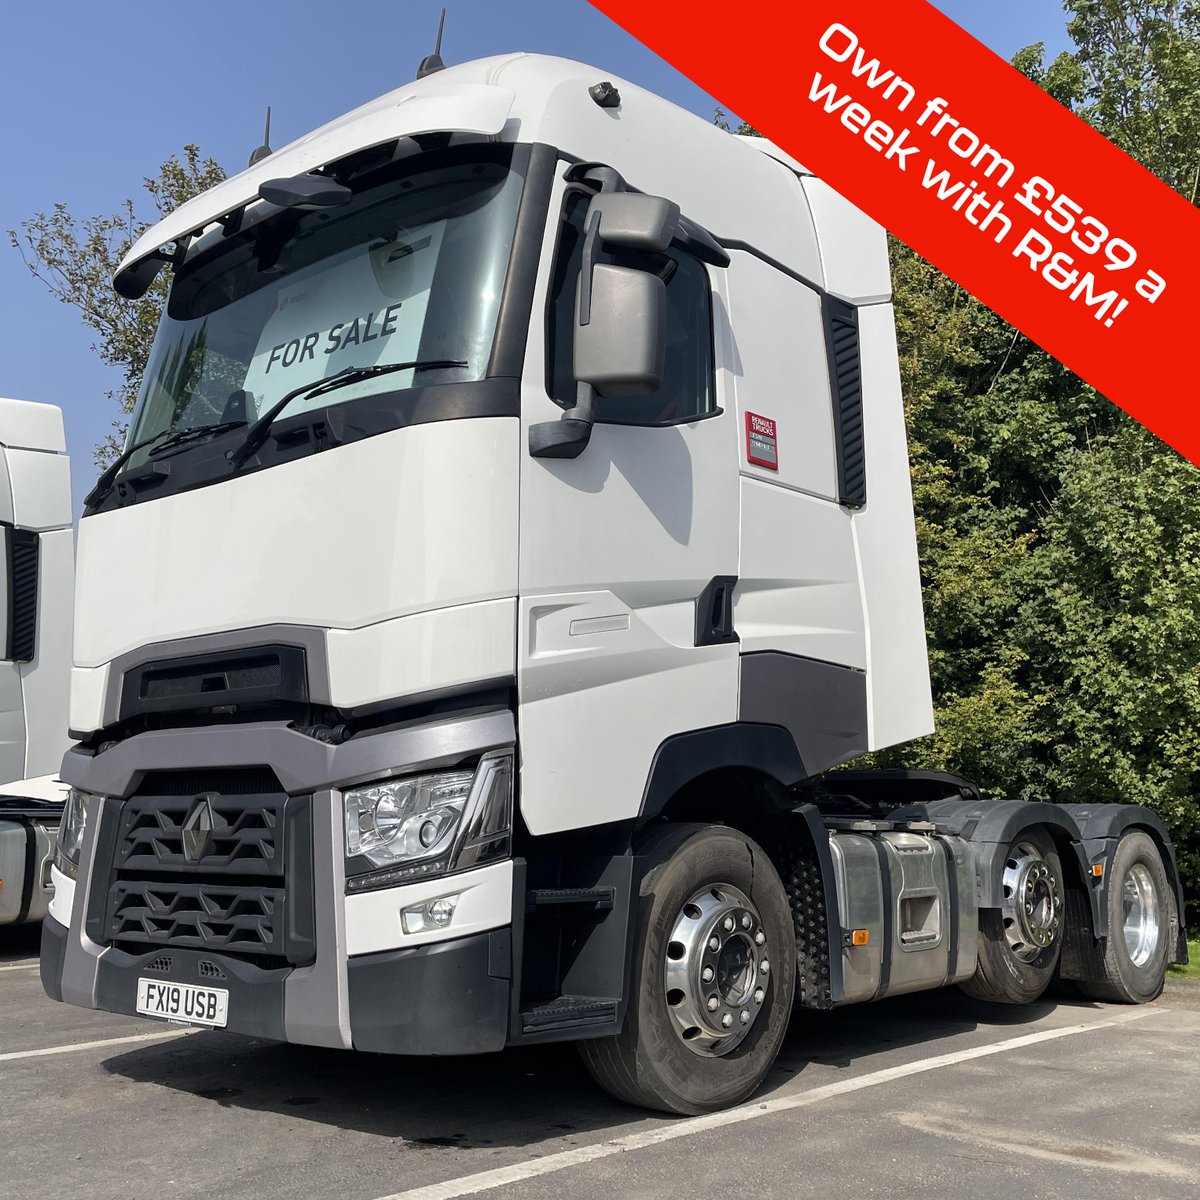 We currently have this used Renault Trucks T High 520.26 6x2 tractor unit available from £539 a week on a 3-year rent-to-buy including R&M*

*subject to T&Cs and credit approval

For more details👇
thompsoncommercials.co.uk/listings/used-…

#UsedTrucks